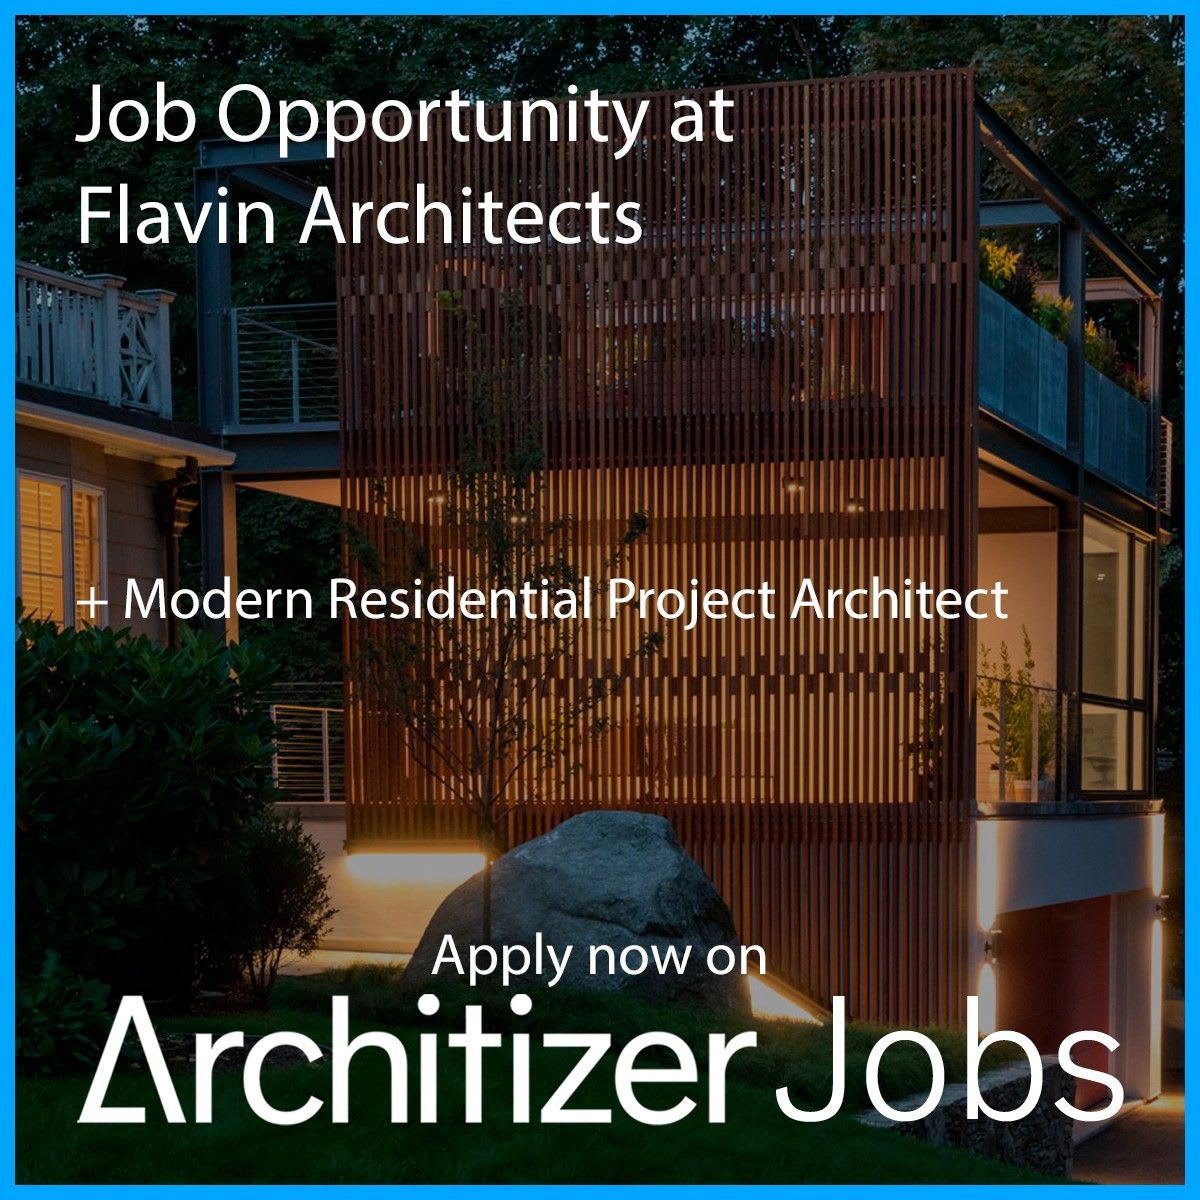 NEW JOB OPPORTUNITY: located in Boston’s West End, Flavin Architects is a boutique firm specializing in modern single-family residences and offer unique professional development expertise. Read more & apply here: https://t.co/7TGGKLXyWC . .